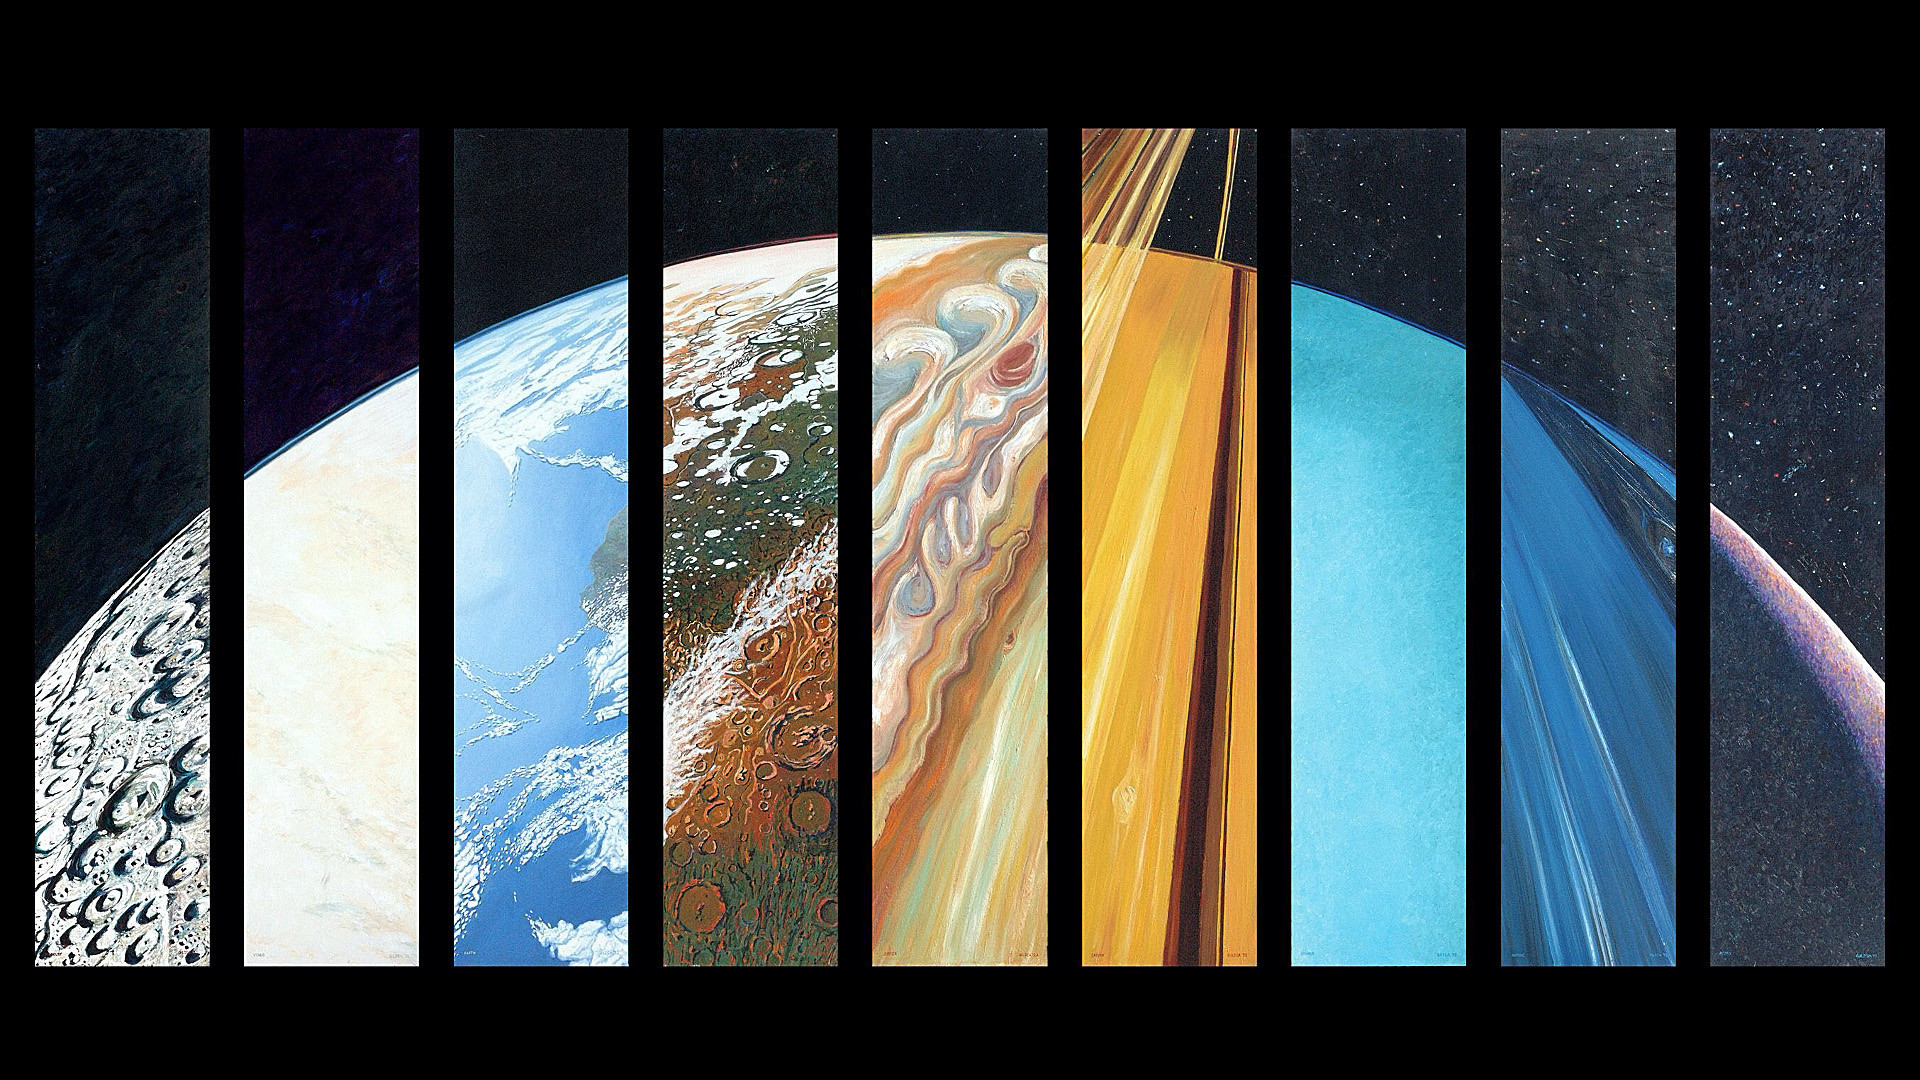 1920x1080 Every Planet in One - Planetary Suite by Steve Gildea [] ...